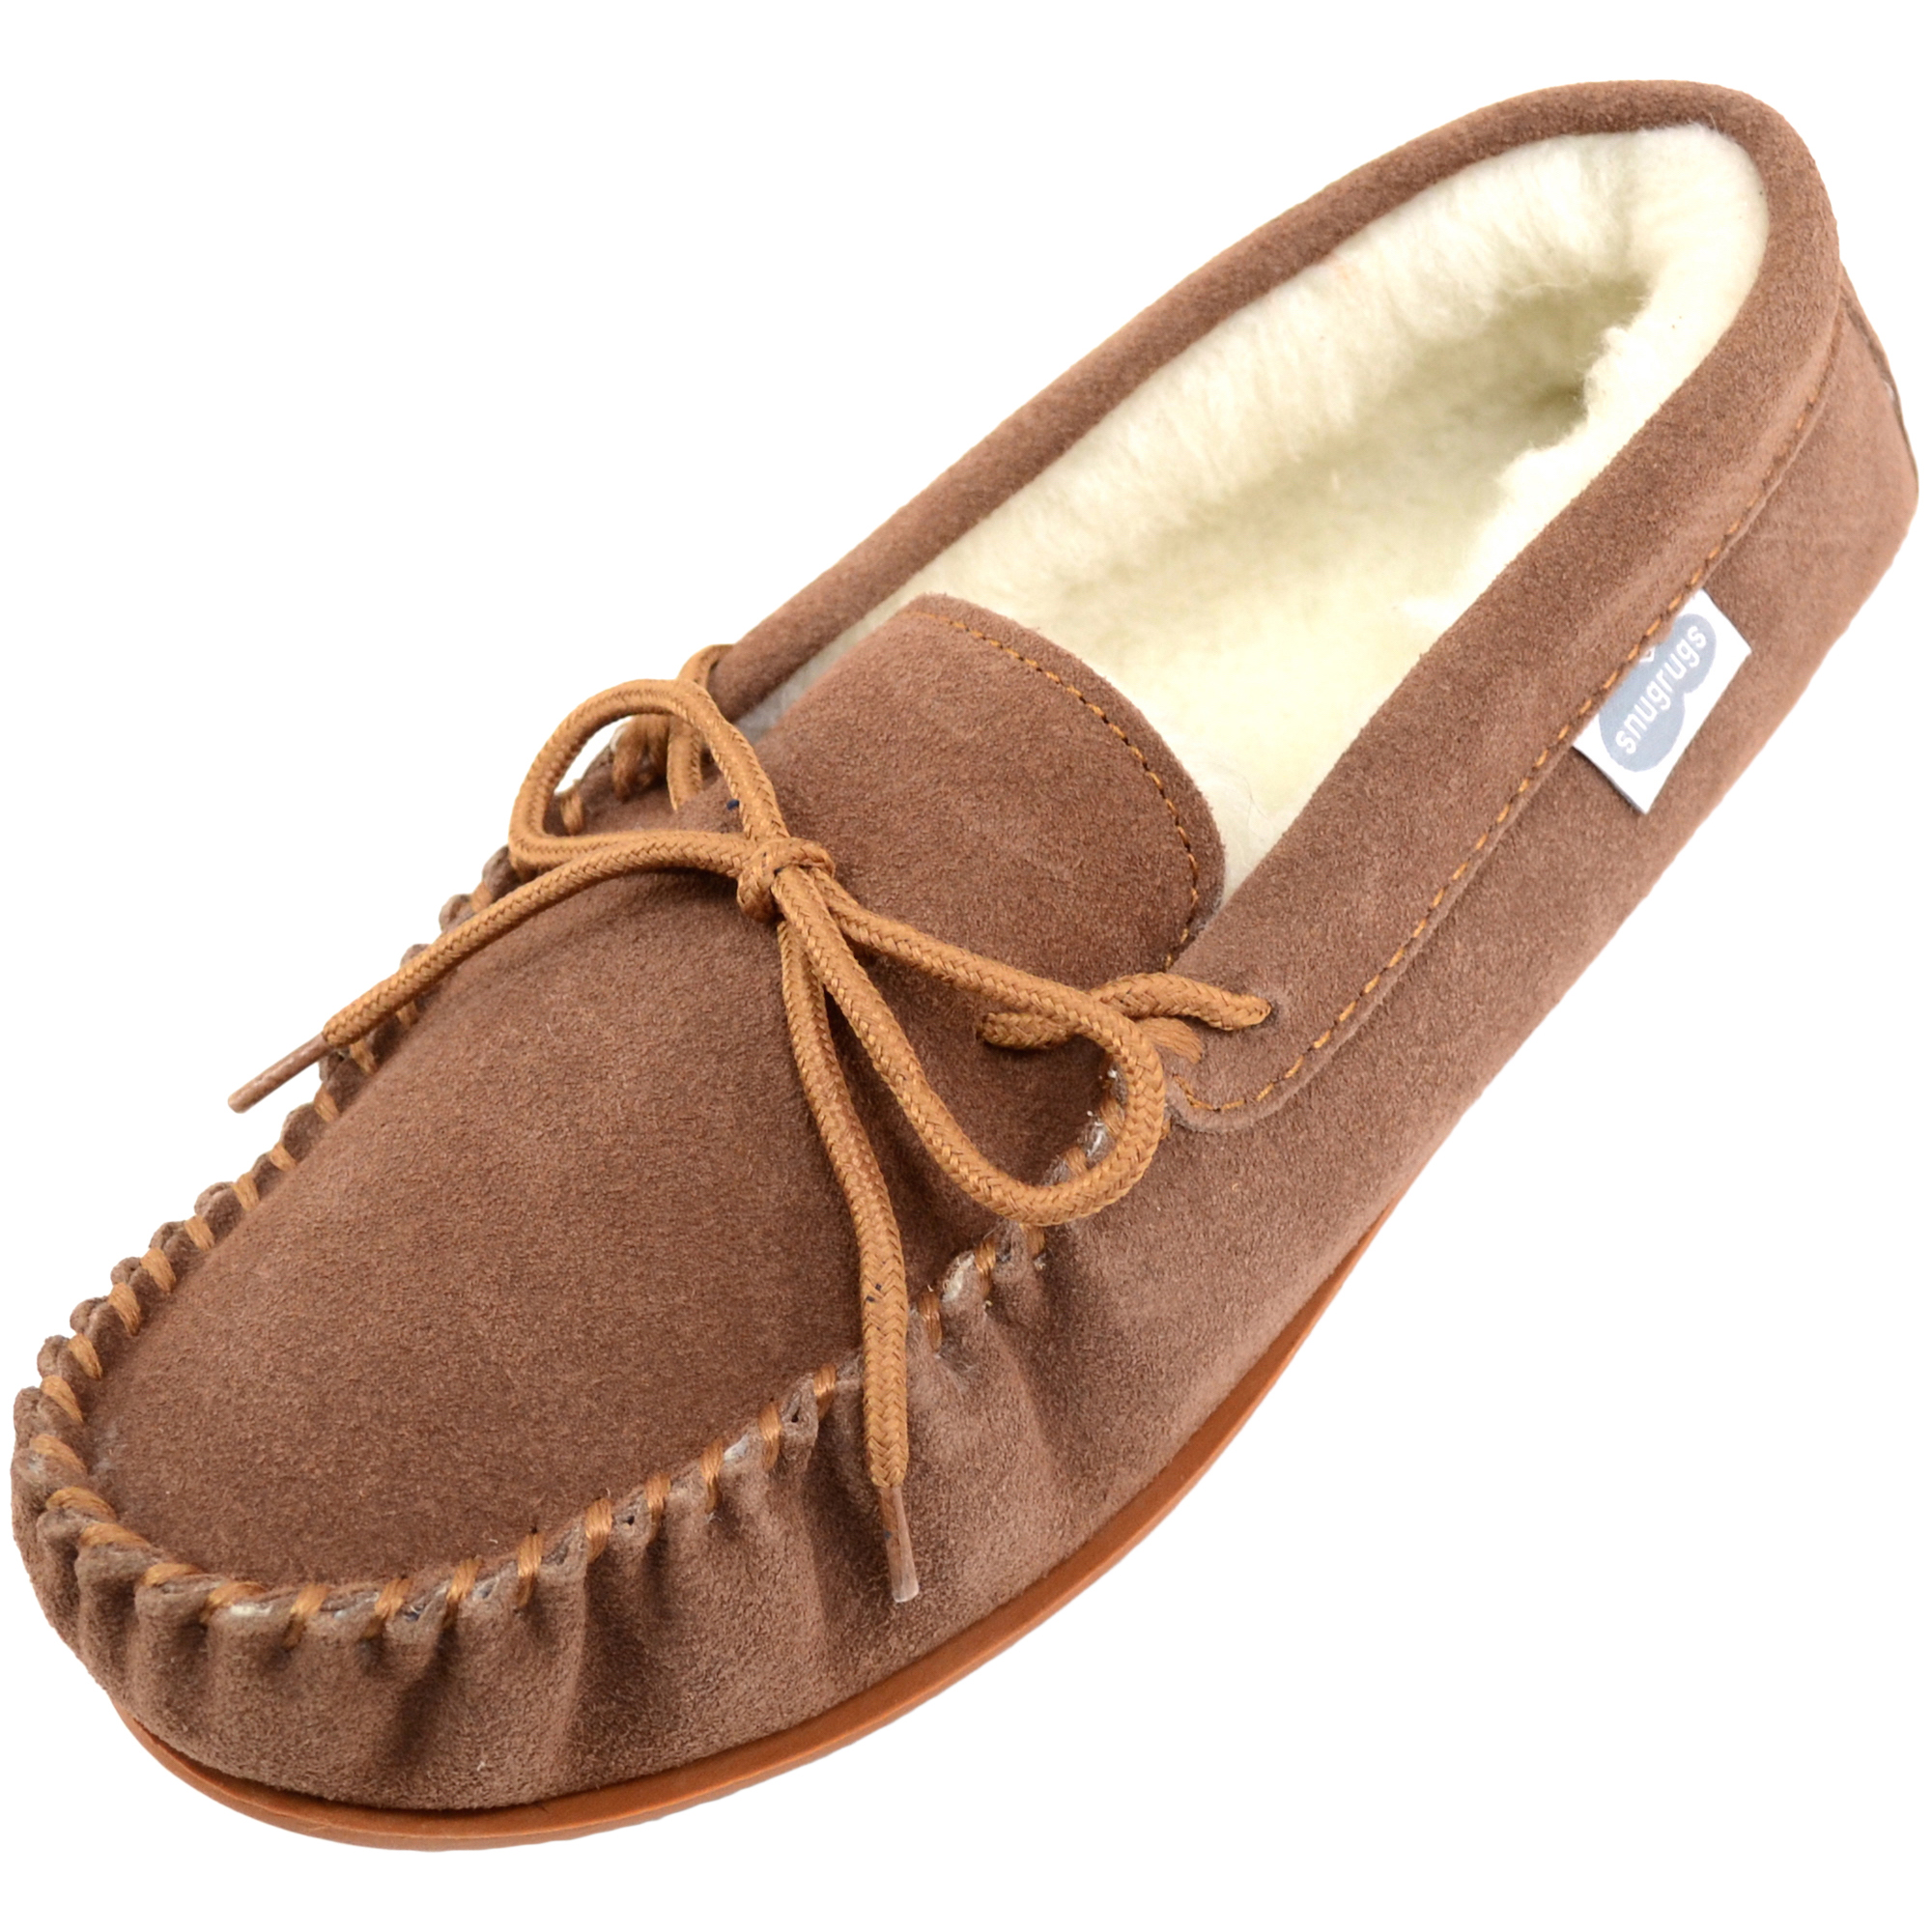 Suede Moccasin Slipper - Thick Wool Lining - Rubber Sole - Snugrugs